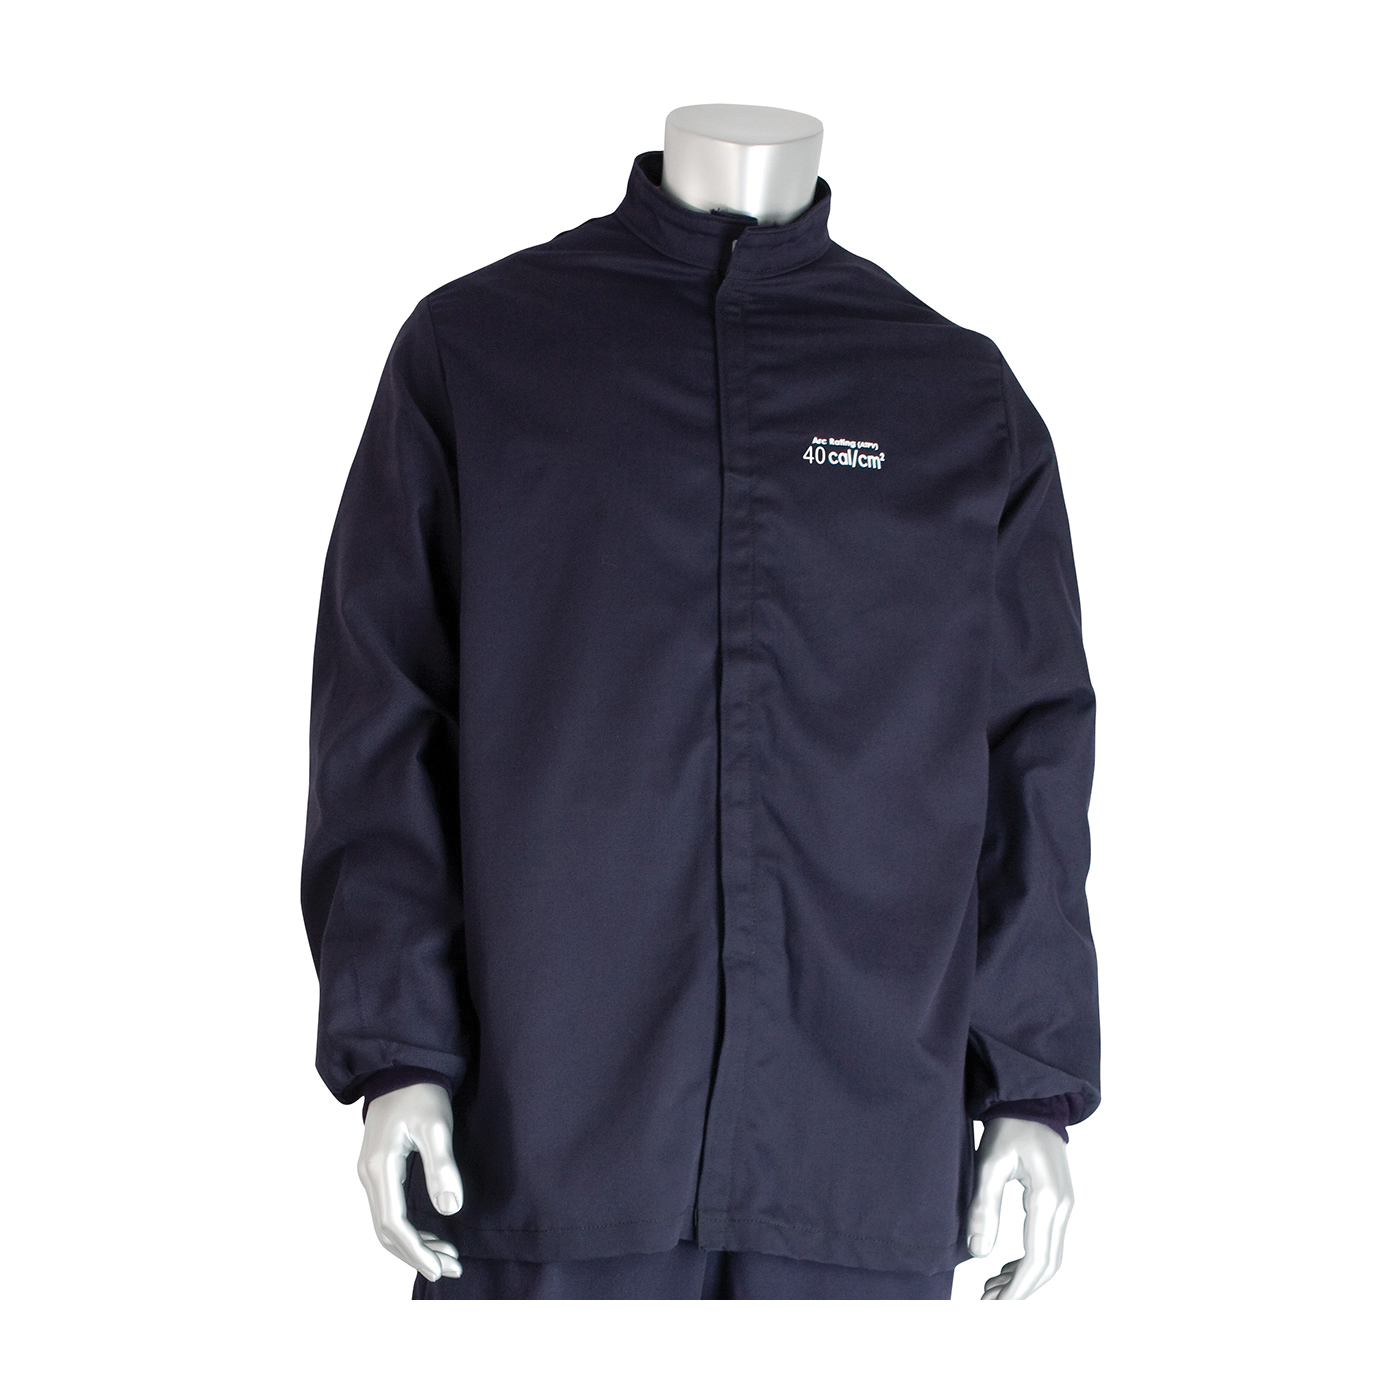 PIP® 9100-52412/3X Arc and Flame Resistant Jacket, 3XL, Navy, Westex® UltraSoft® 88% Cotton 12% High Tenacity Nylon, 56 to 58 in Chest, Resists: Arc and Flame, ASTM F1506-10a, ASTM F2178-12